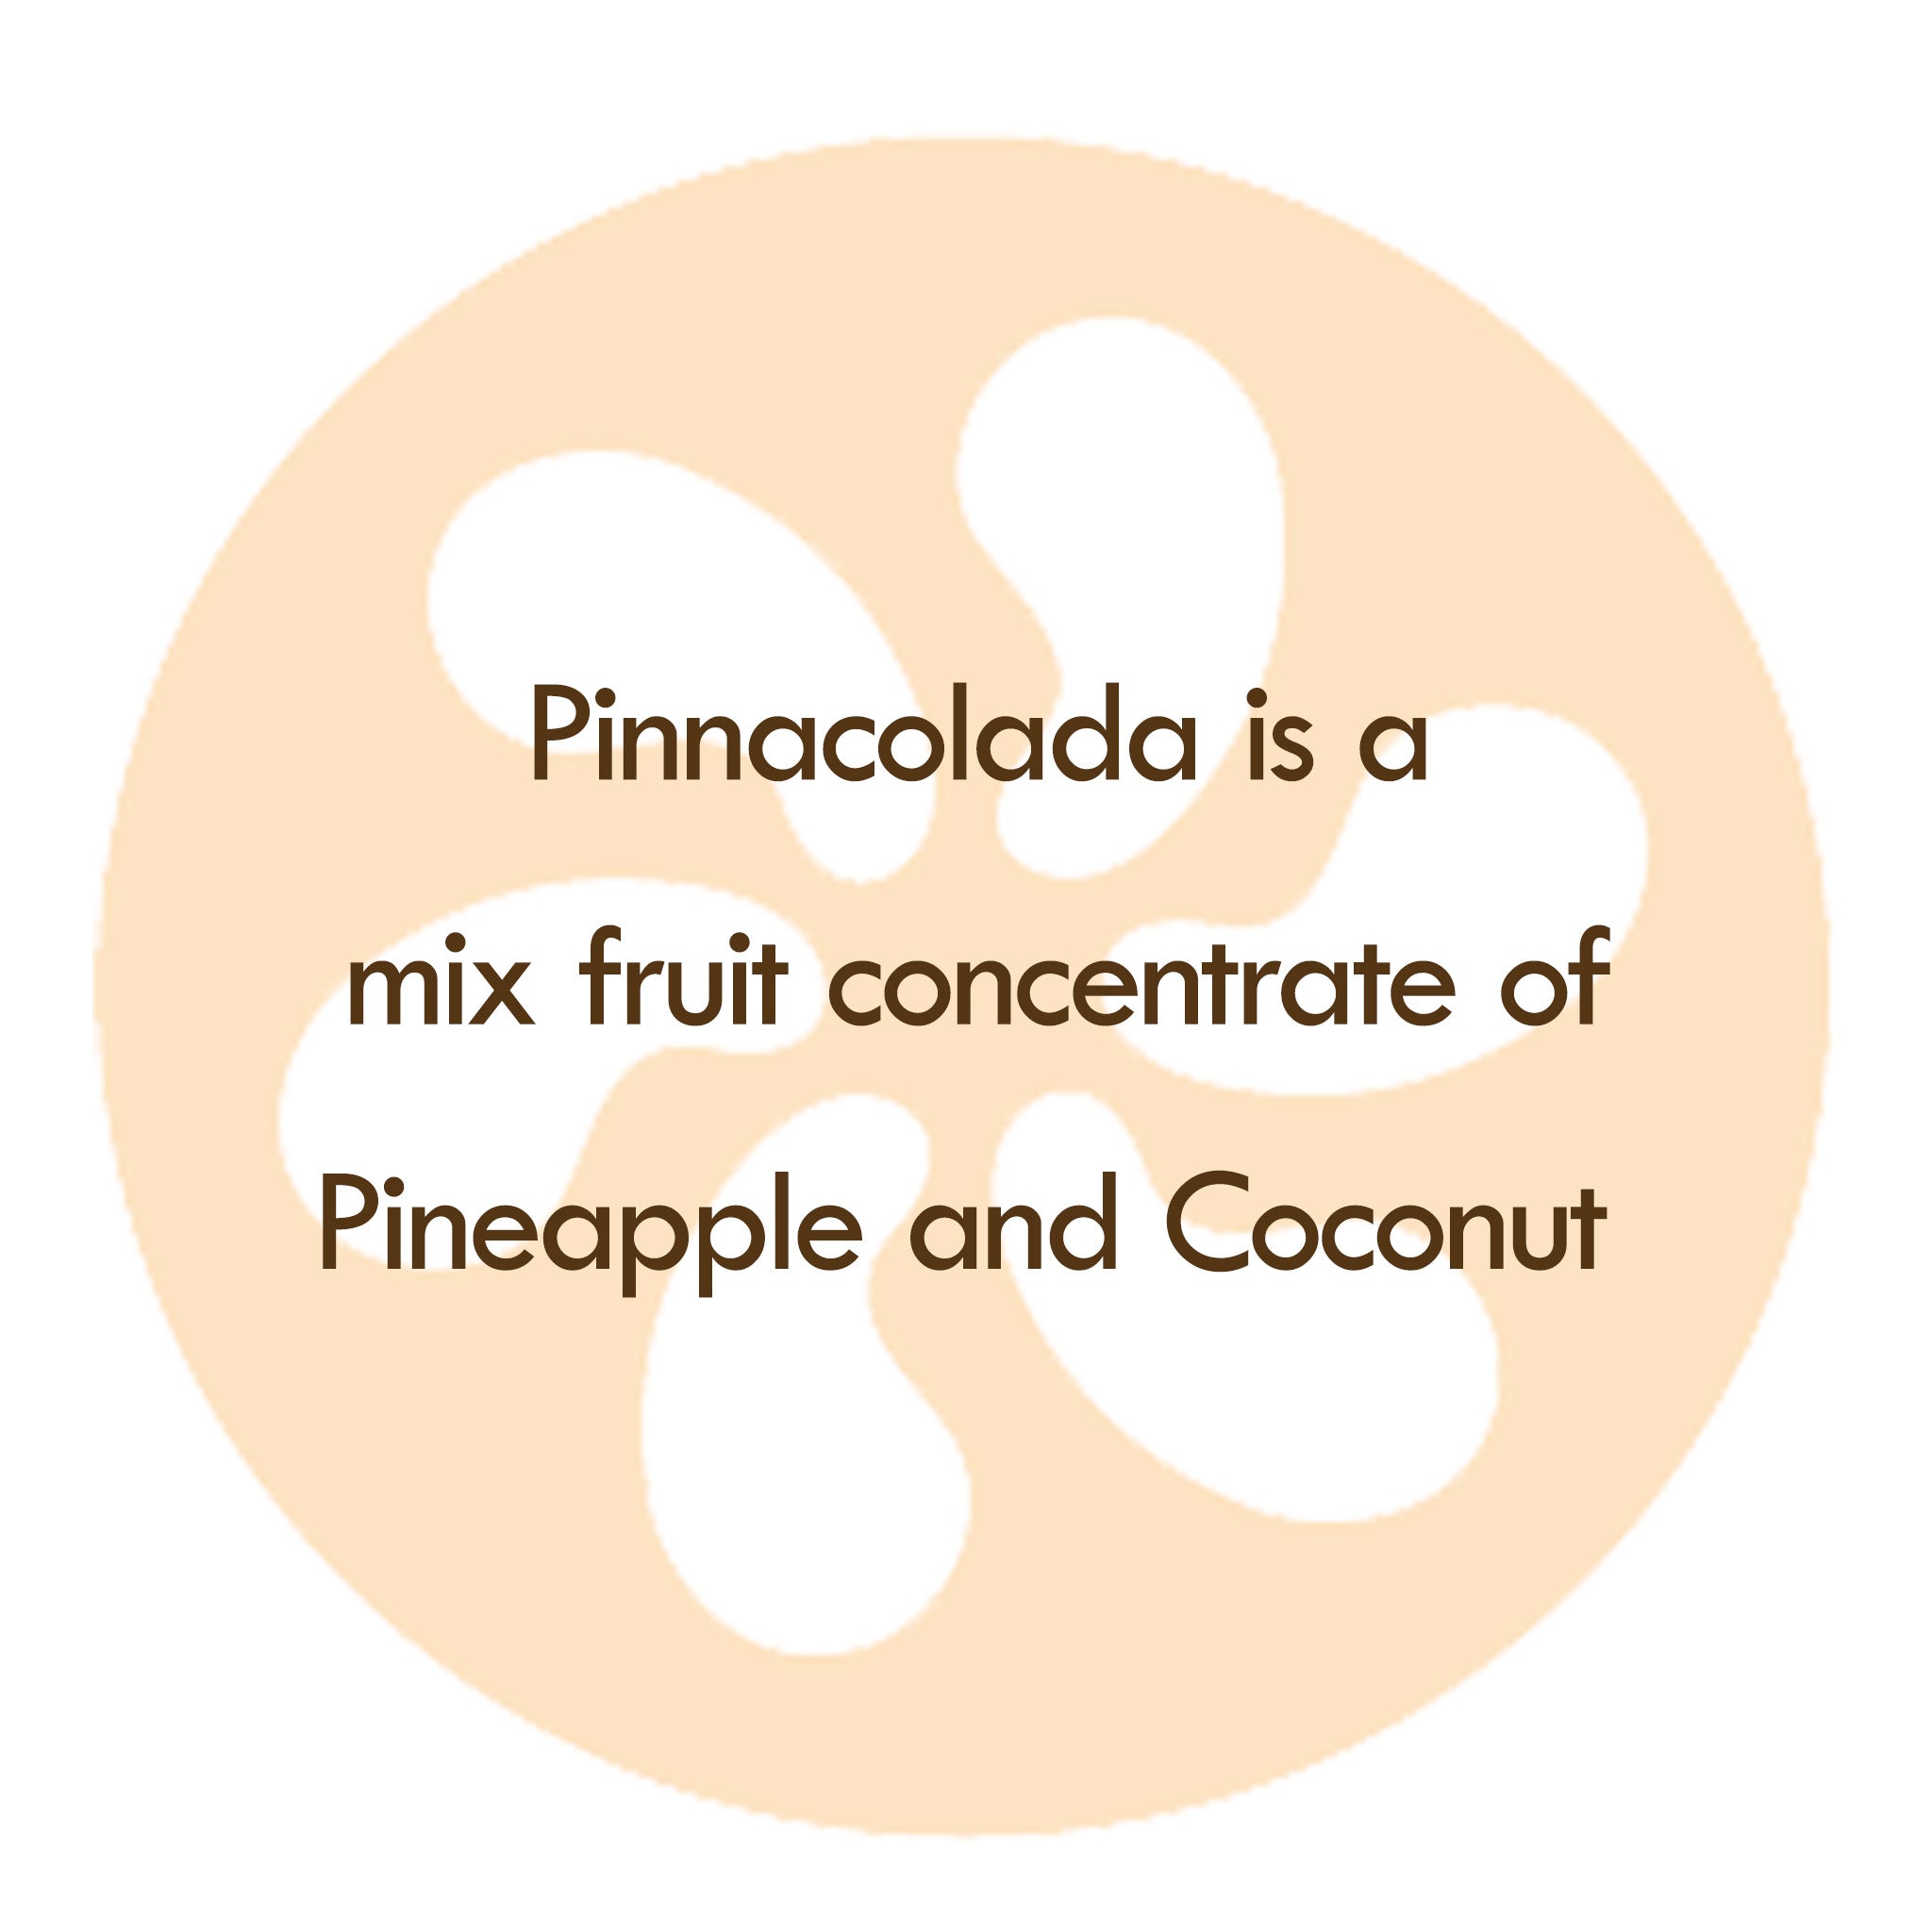 Our Pinnacolada Mocktail is a concentrate of Pineapple and Coconut.